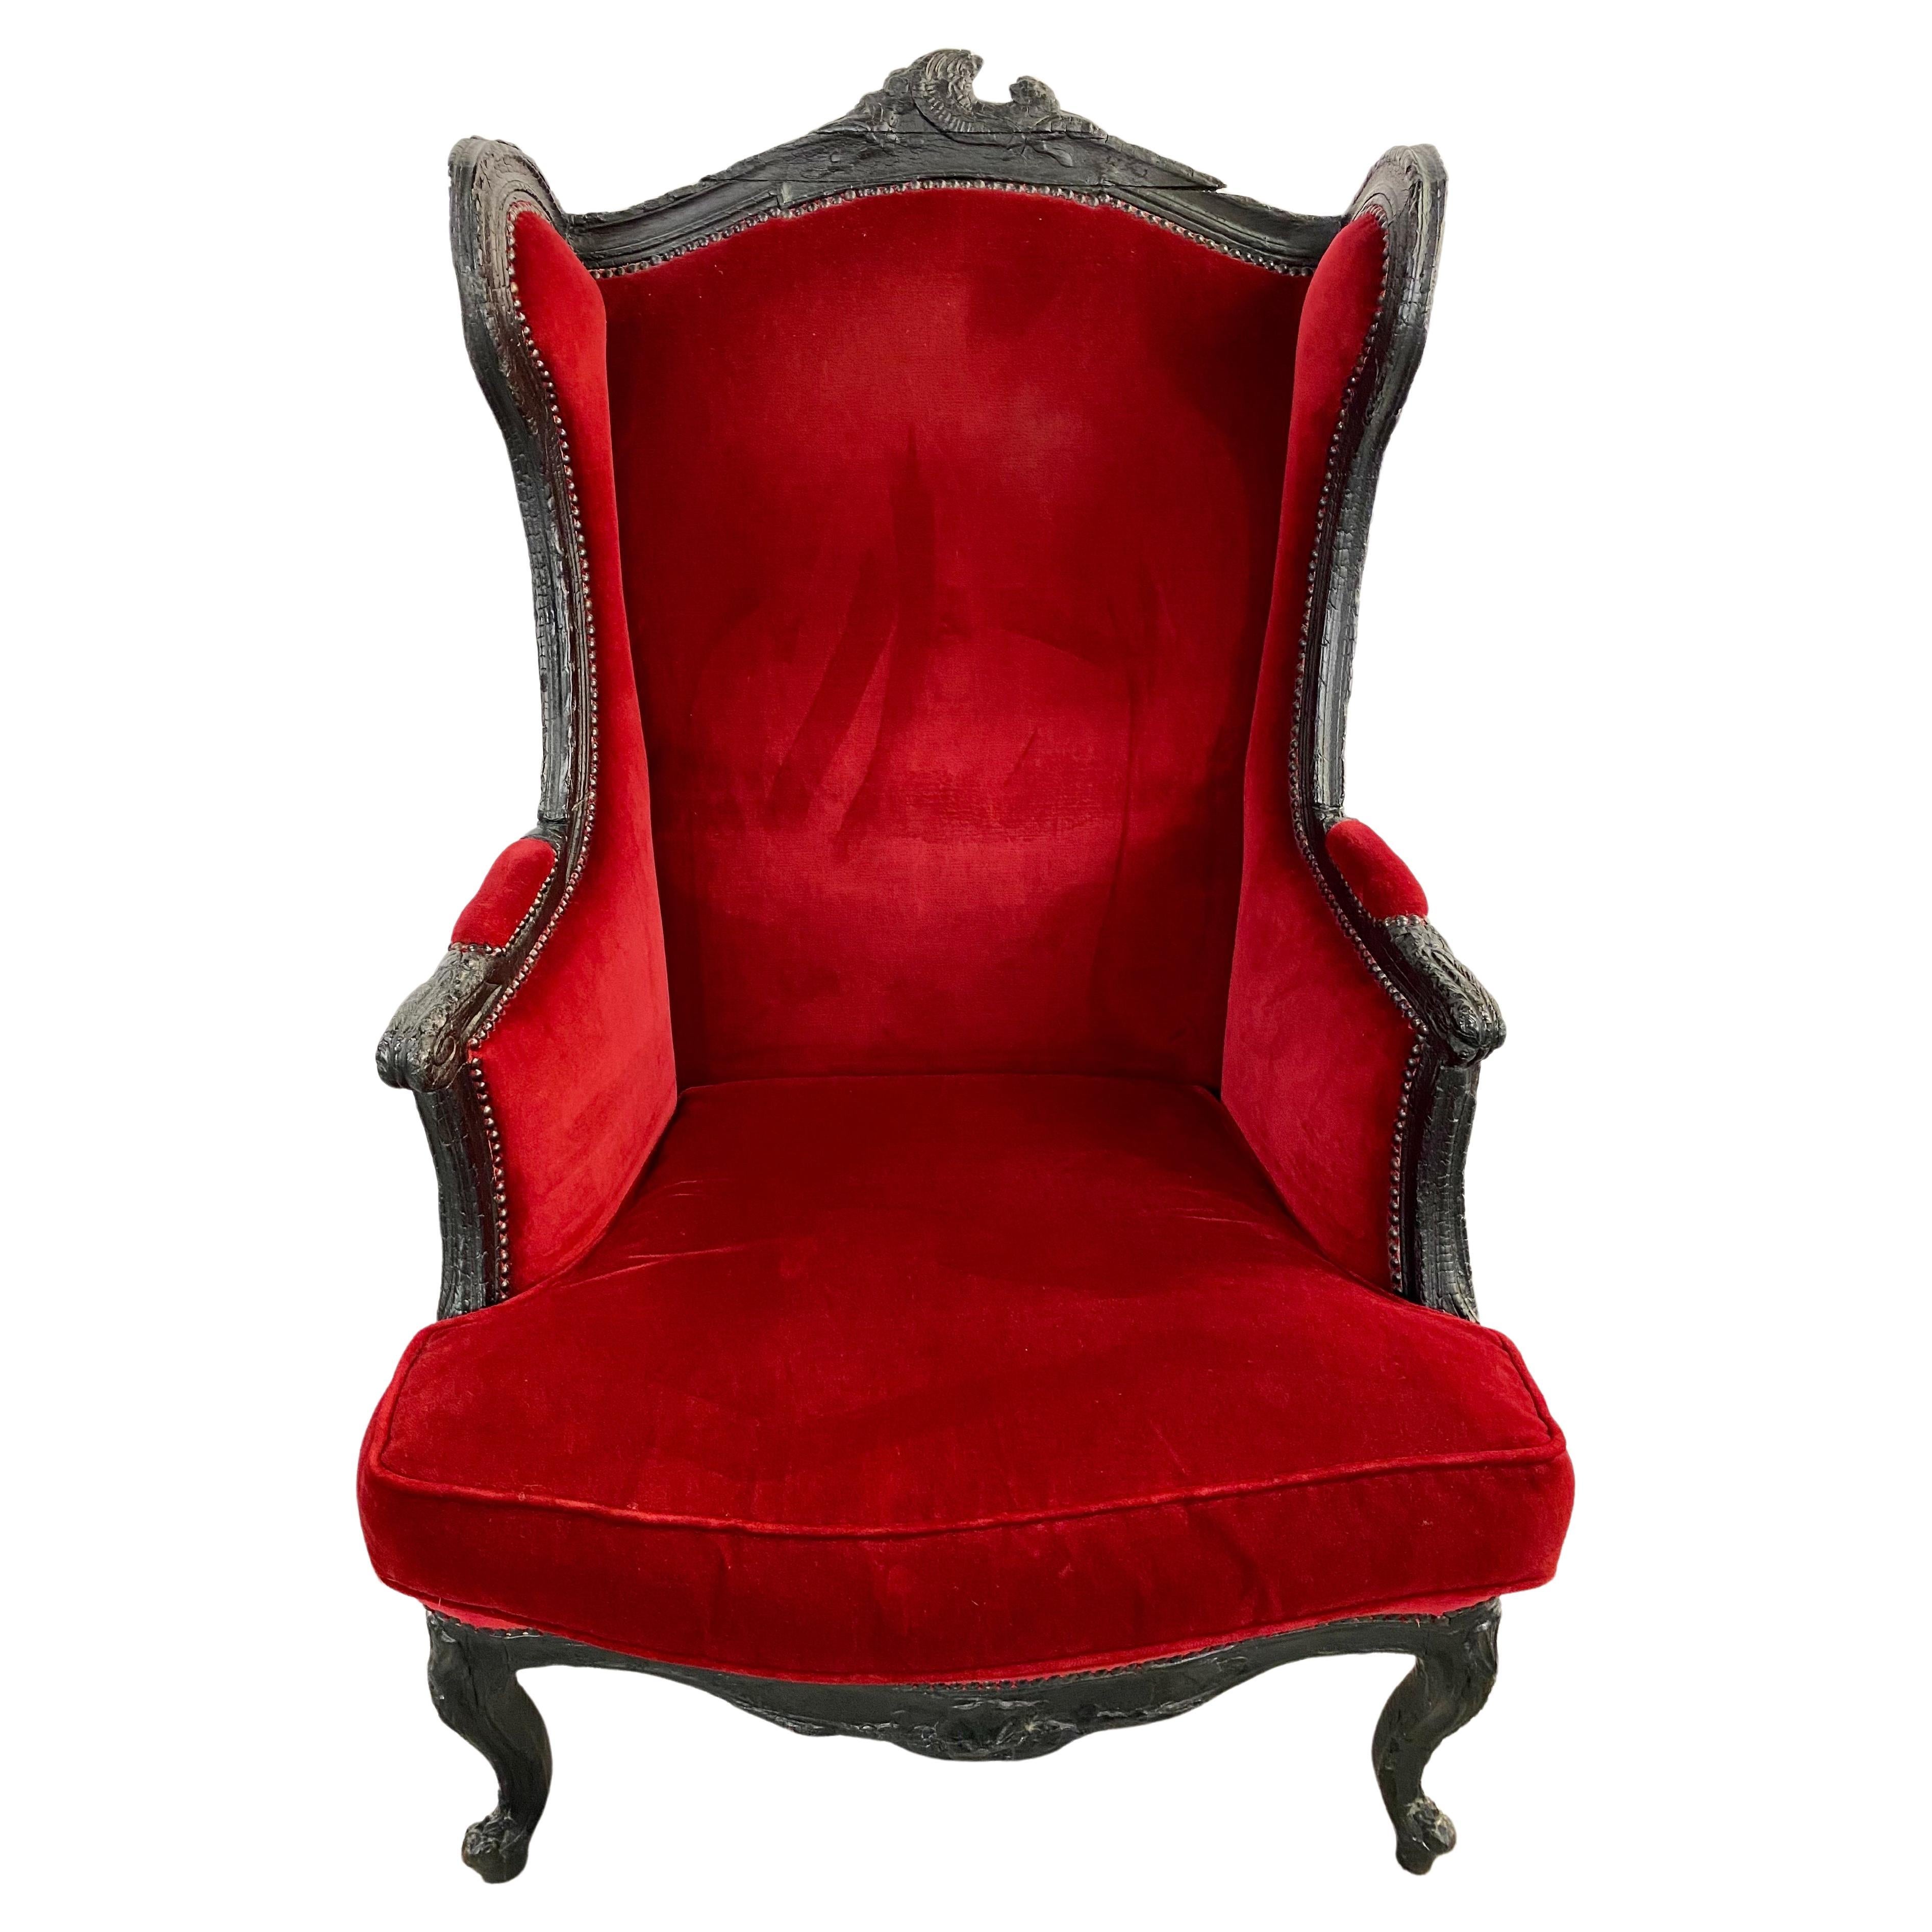 A glamorous and hight quality Renaissance Revival wingback chair and matching ottoman designed by award winning Dutch artist designer Marteen Baas ( born in Germany, 1978). This exquisite set of chair and ottoman has been specially designed for the